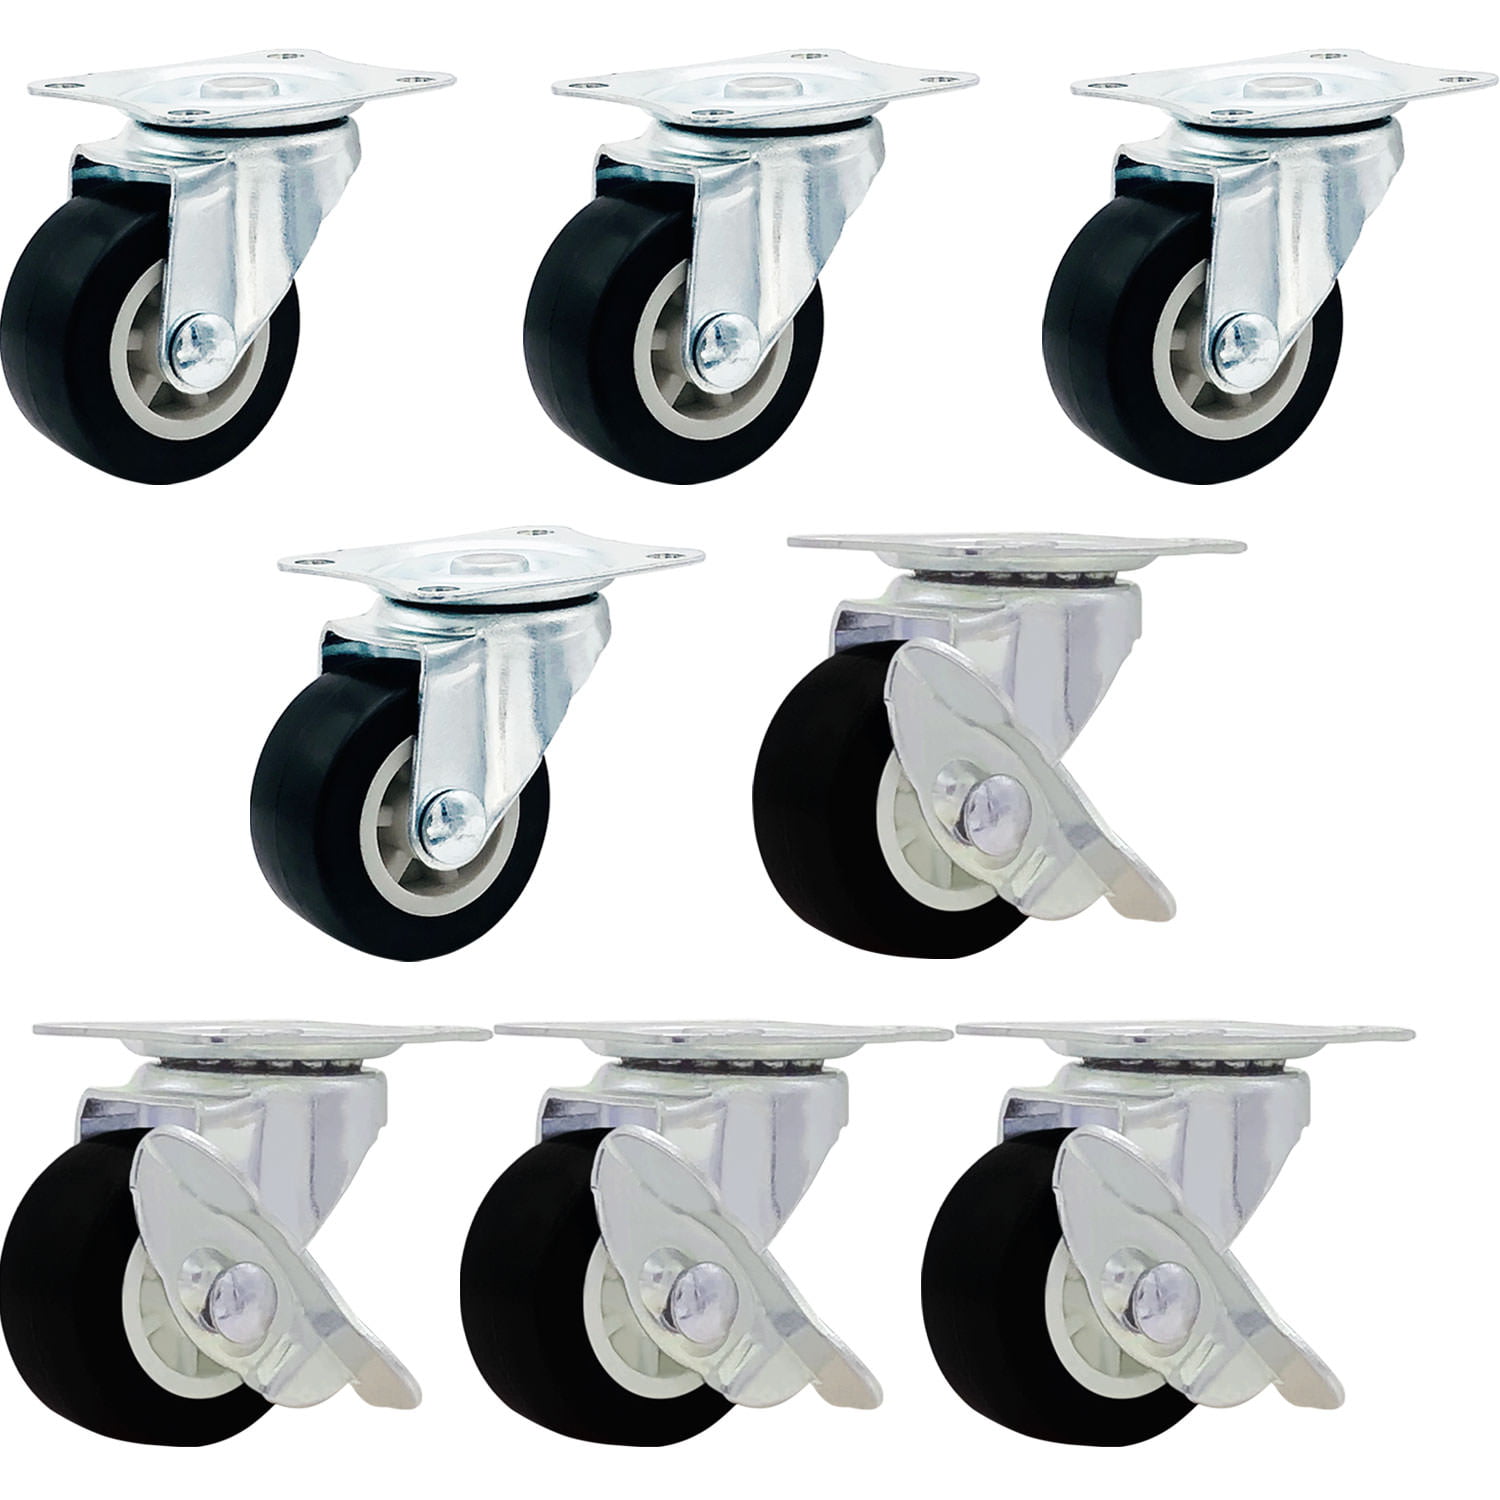 Details about   bayite 4 Pack 1" Low Profile Casters Wheels Soft Rubber Swivel Caster with 360 